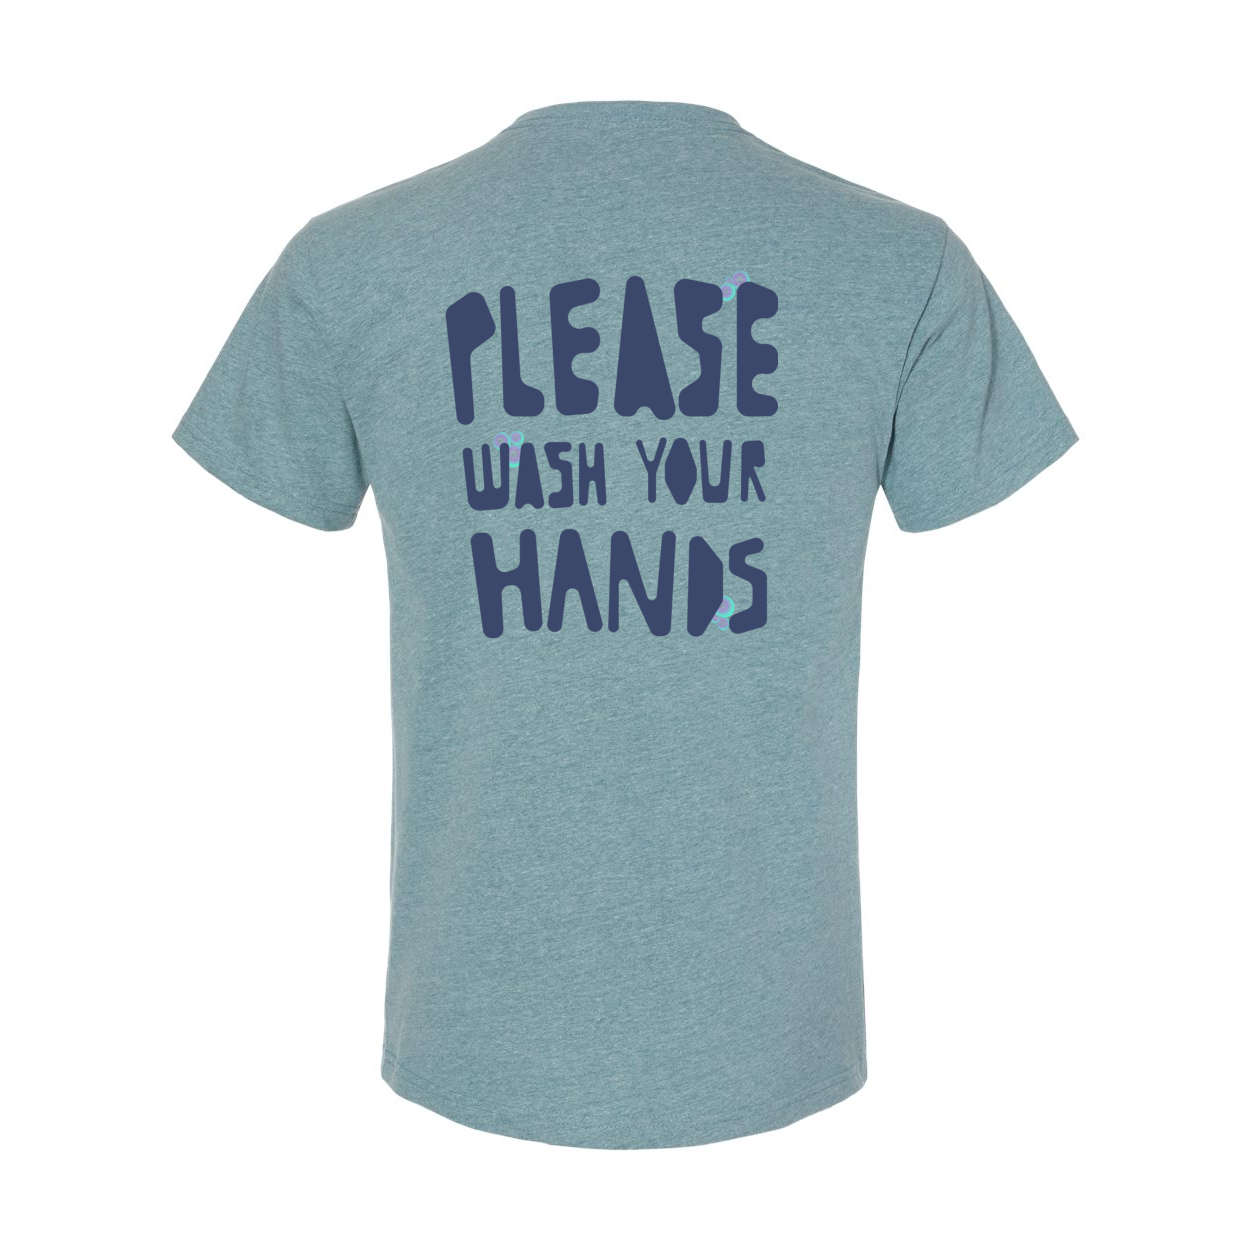 'Please wash your hands' on back of blue shirt